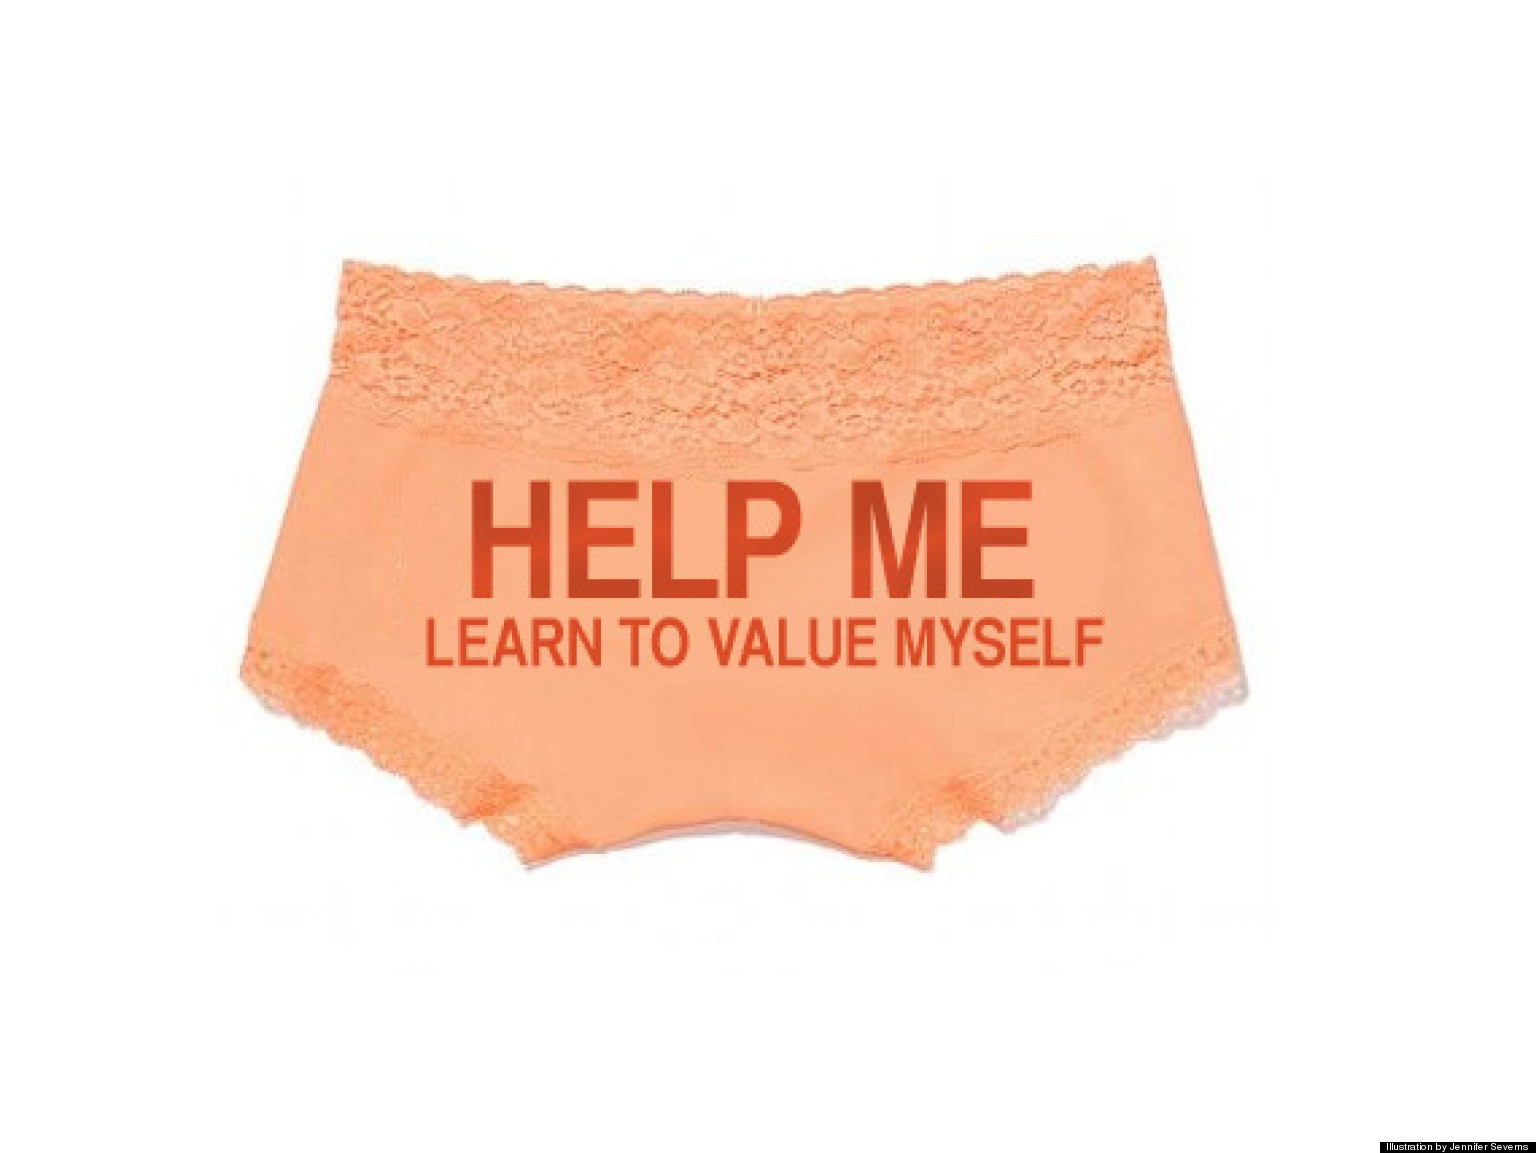 What Victoria's Secret 'Bright Young Things' Underwear Should Say ...